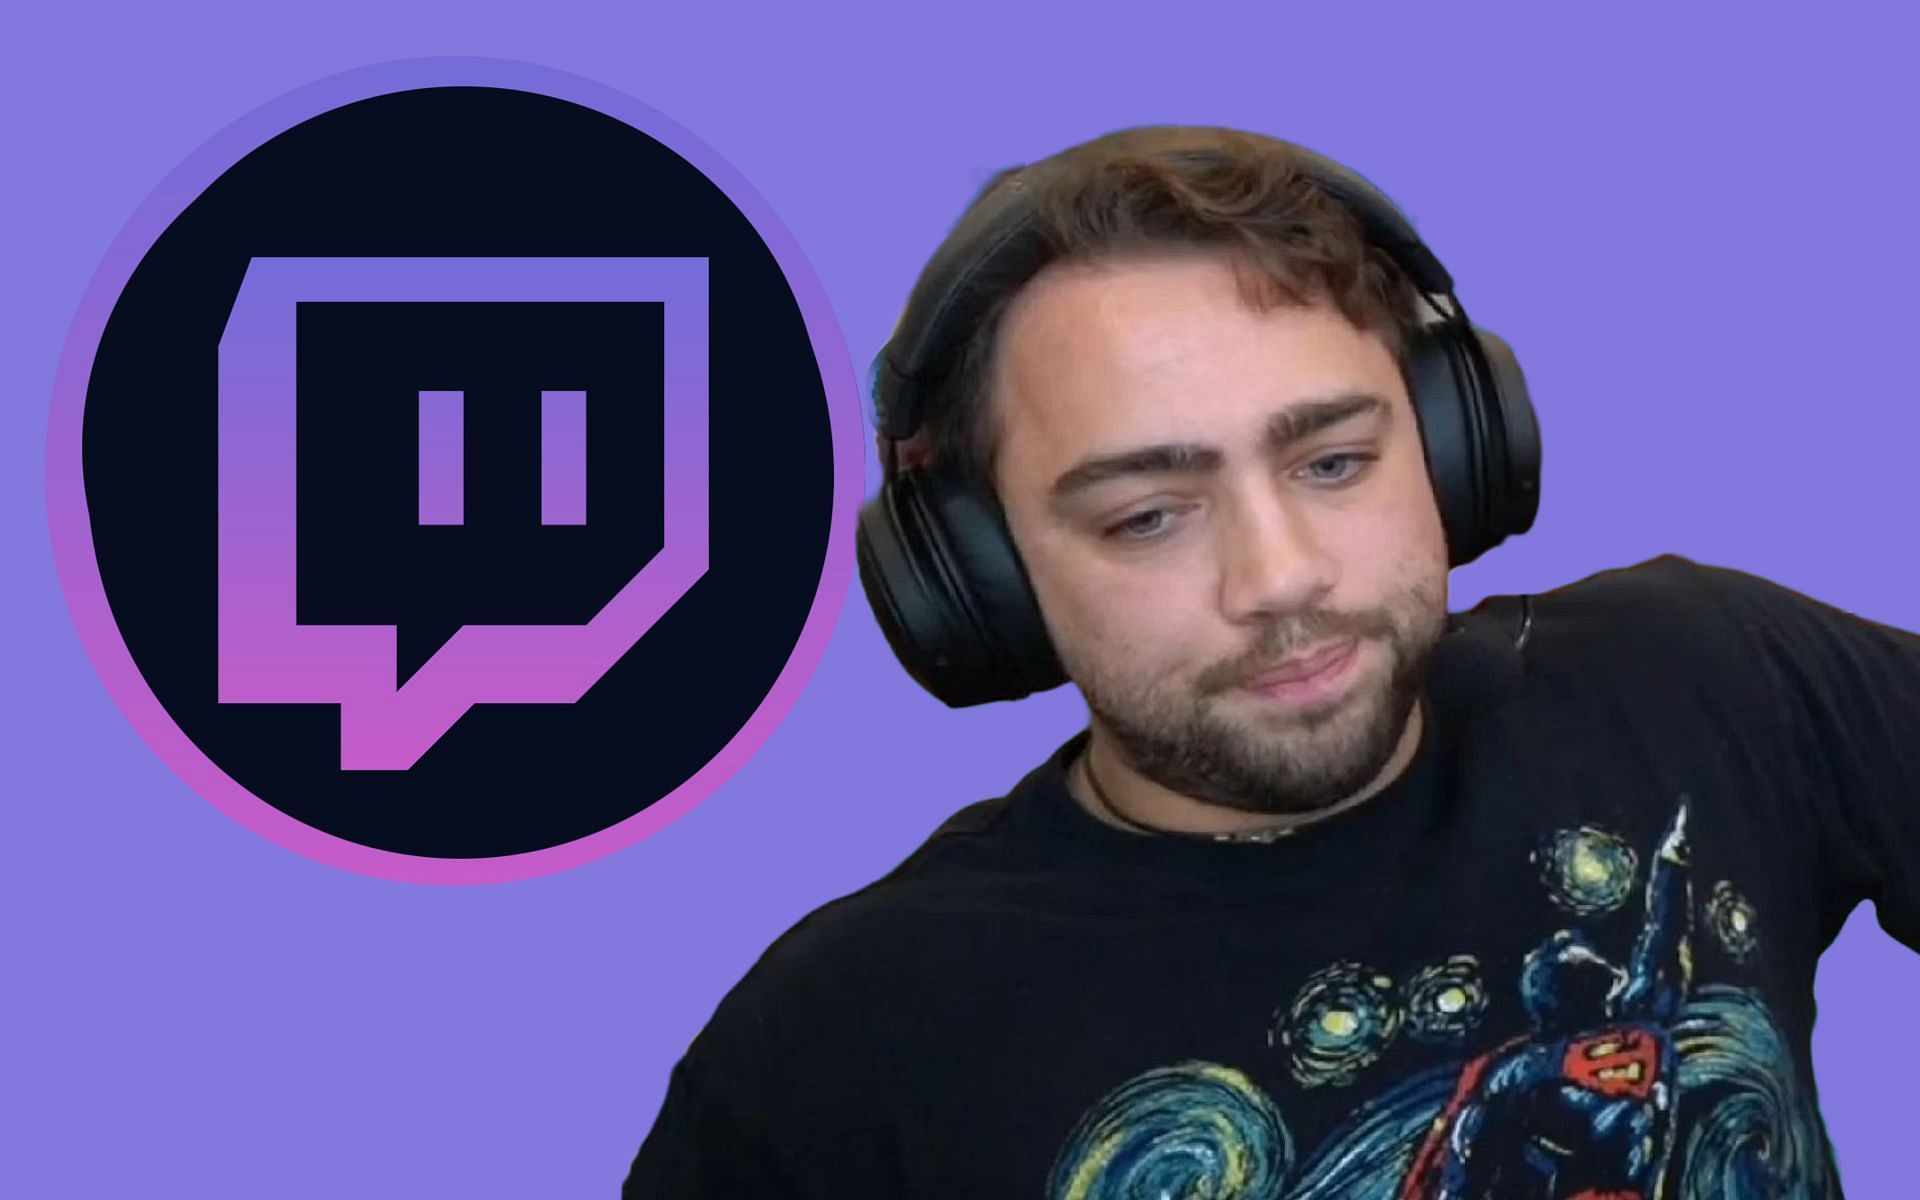 Mizkif was banned for the second time on January 14, 2023 (Image via Sportskeeda)